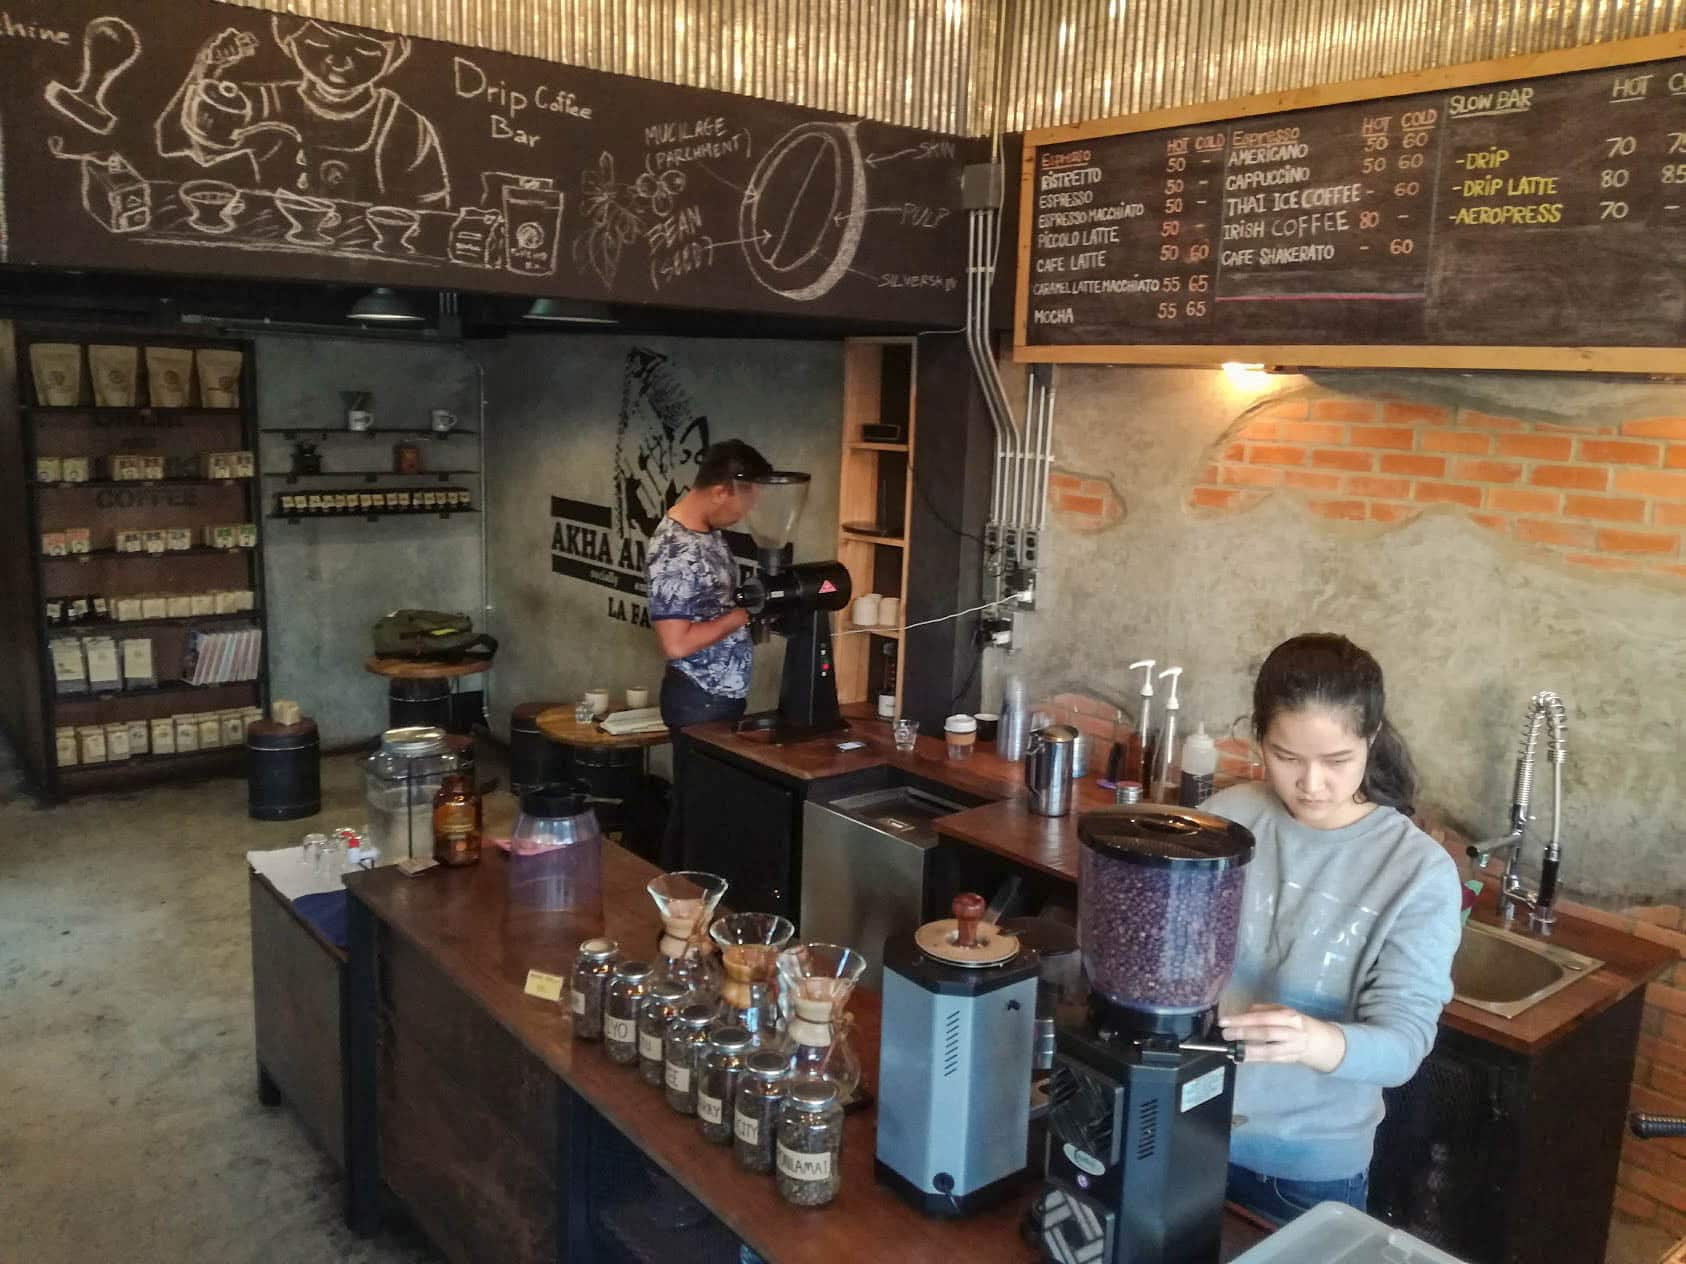 Akha Ama Chiang Mai | reviewed by Asser Christensen for The Coffeevine